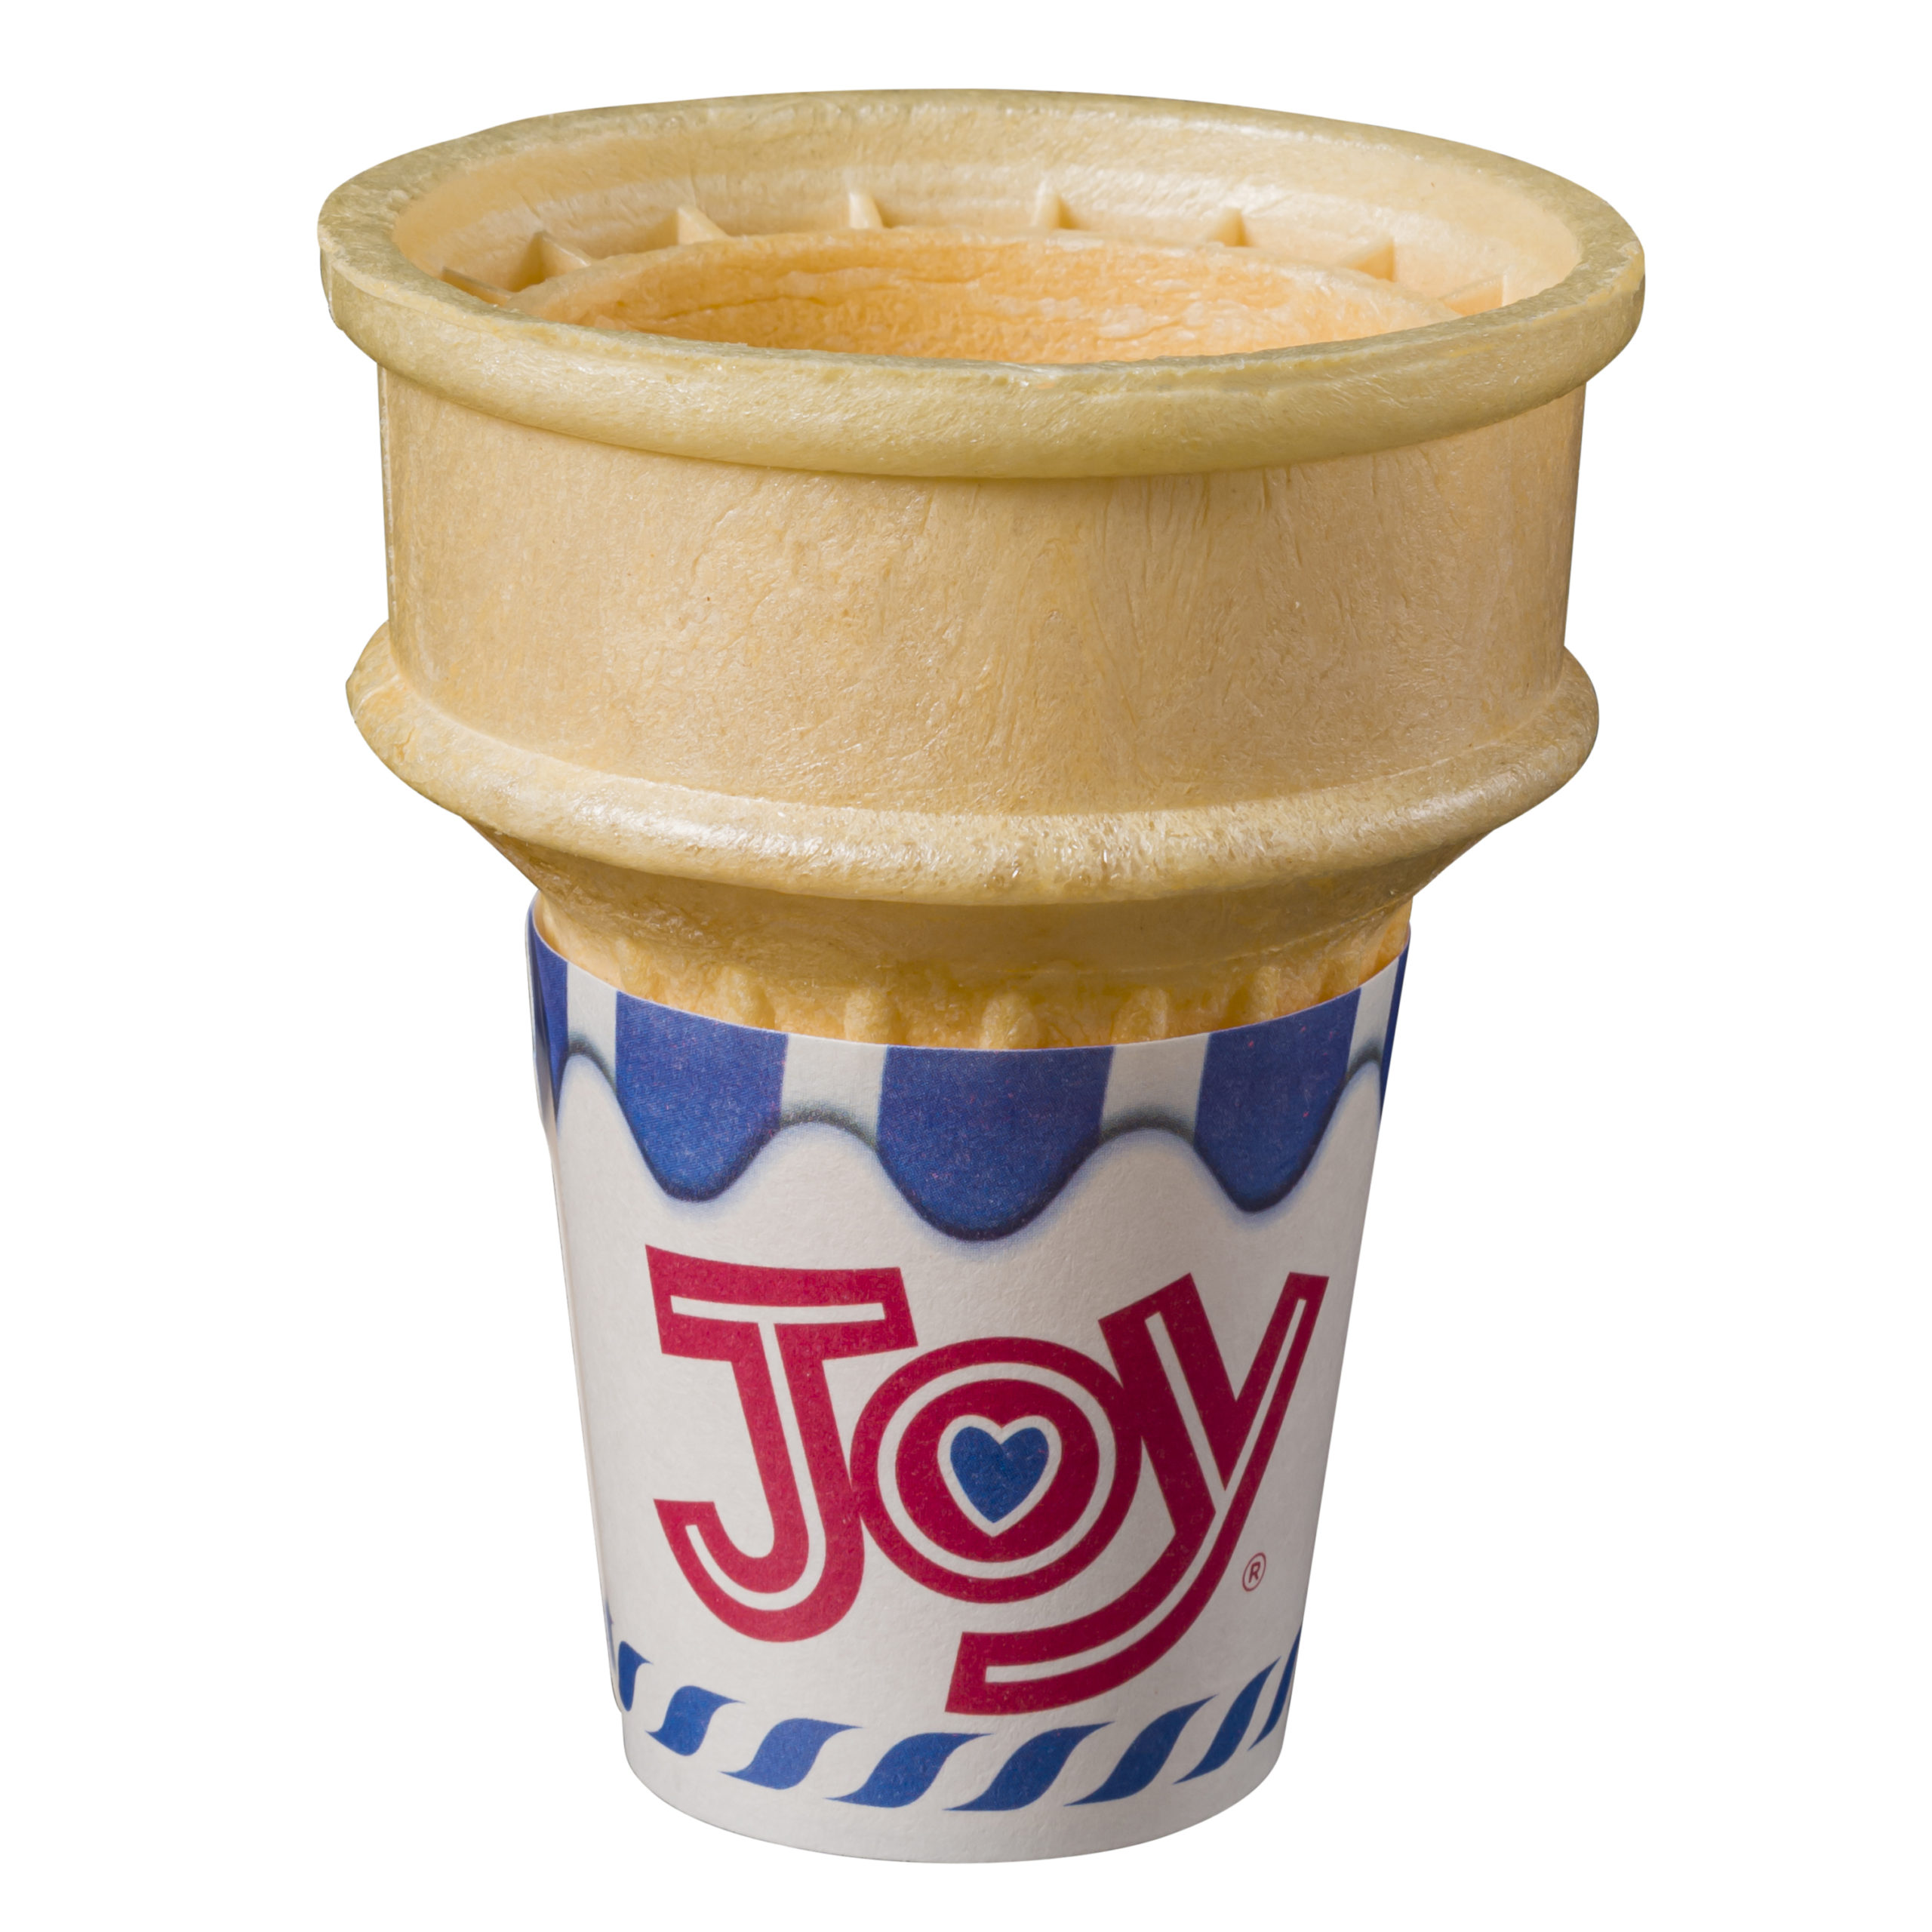 Joy Jacketed Cup